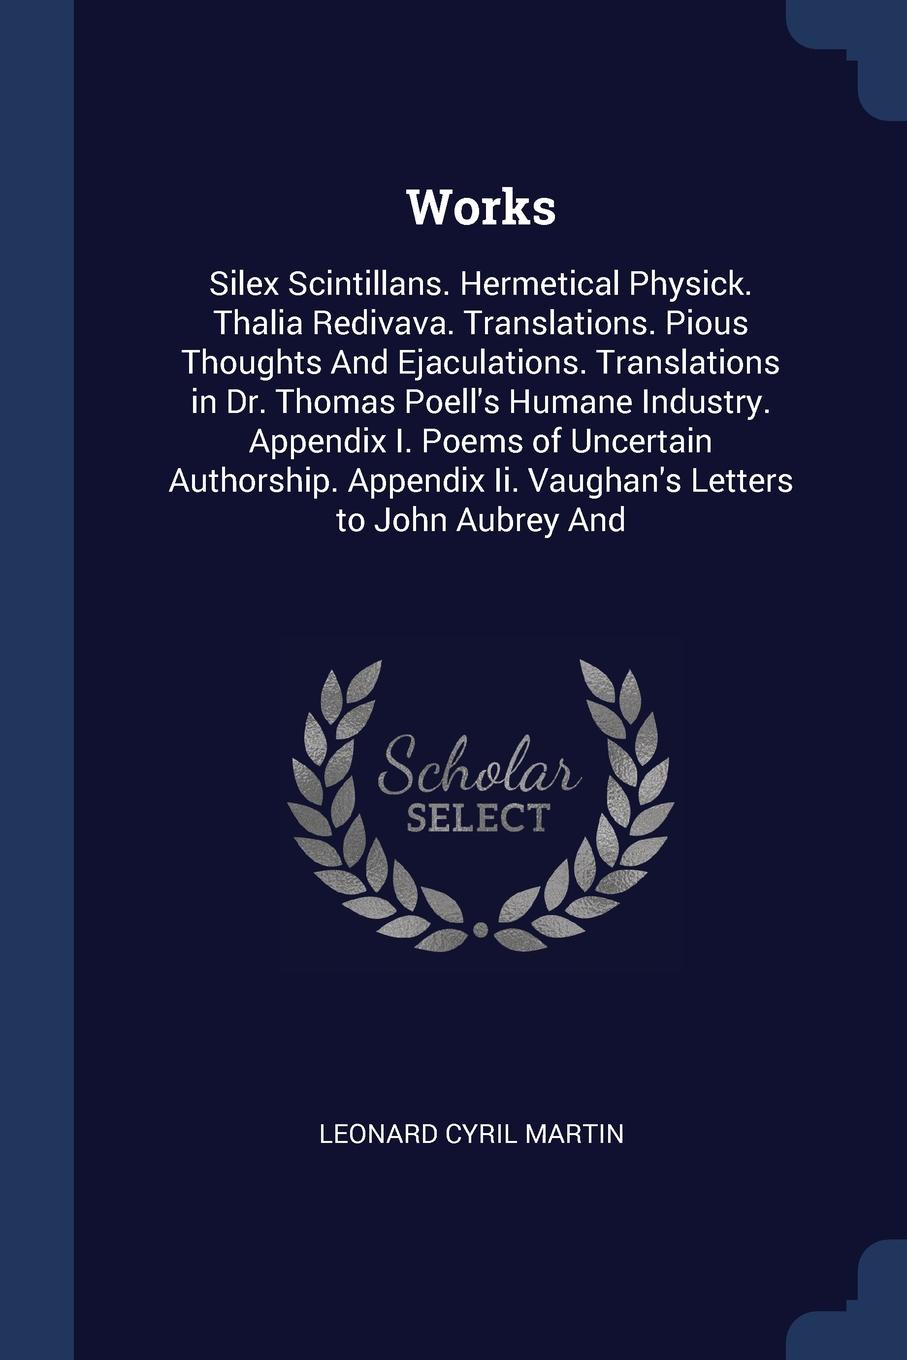 Works. Silex Scintillans. Hermetical Physick. Thalia Redivava. Translations. Pious Thoughts And Ejaculations. Translations in Dr. Thomas Poell`s Humane Industry. Appendix I. Poems of Uncertain Authorship. Appendix Ii. Vaughan`s Letters to John Aub...